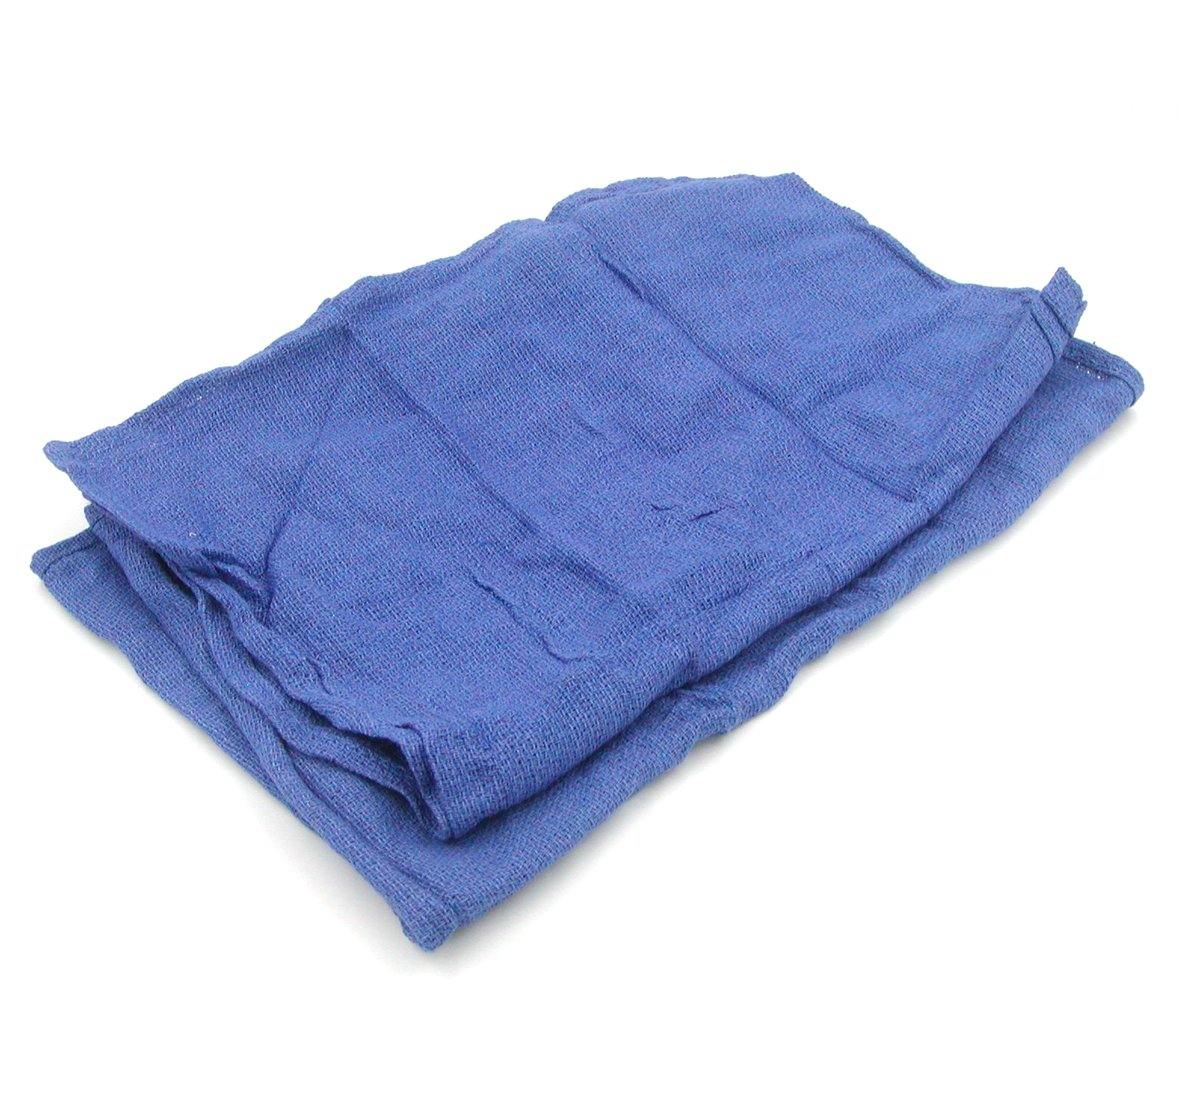 Up close image of a new blue surgical towel